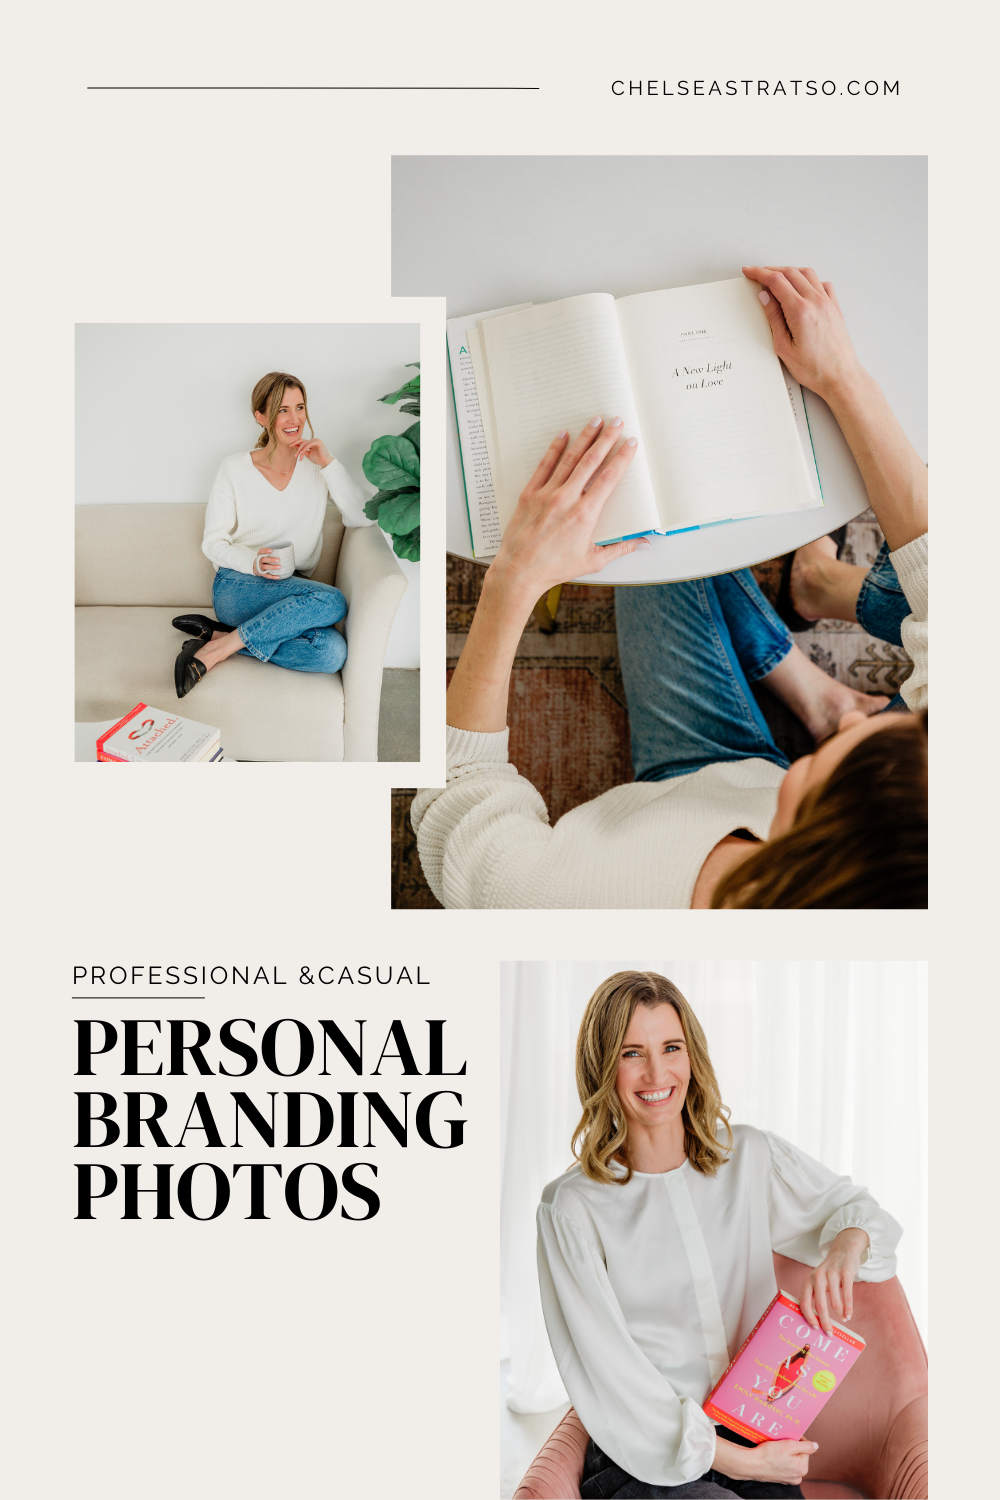 Pinterest pin for professional and casual la personal branding photos.